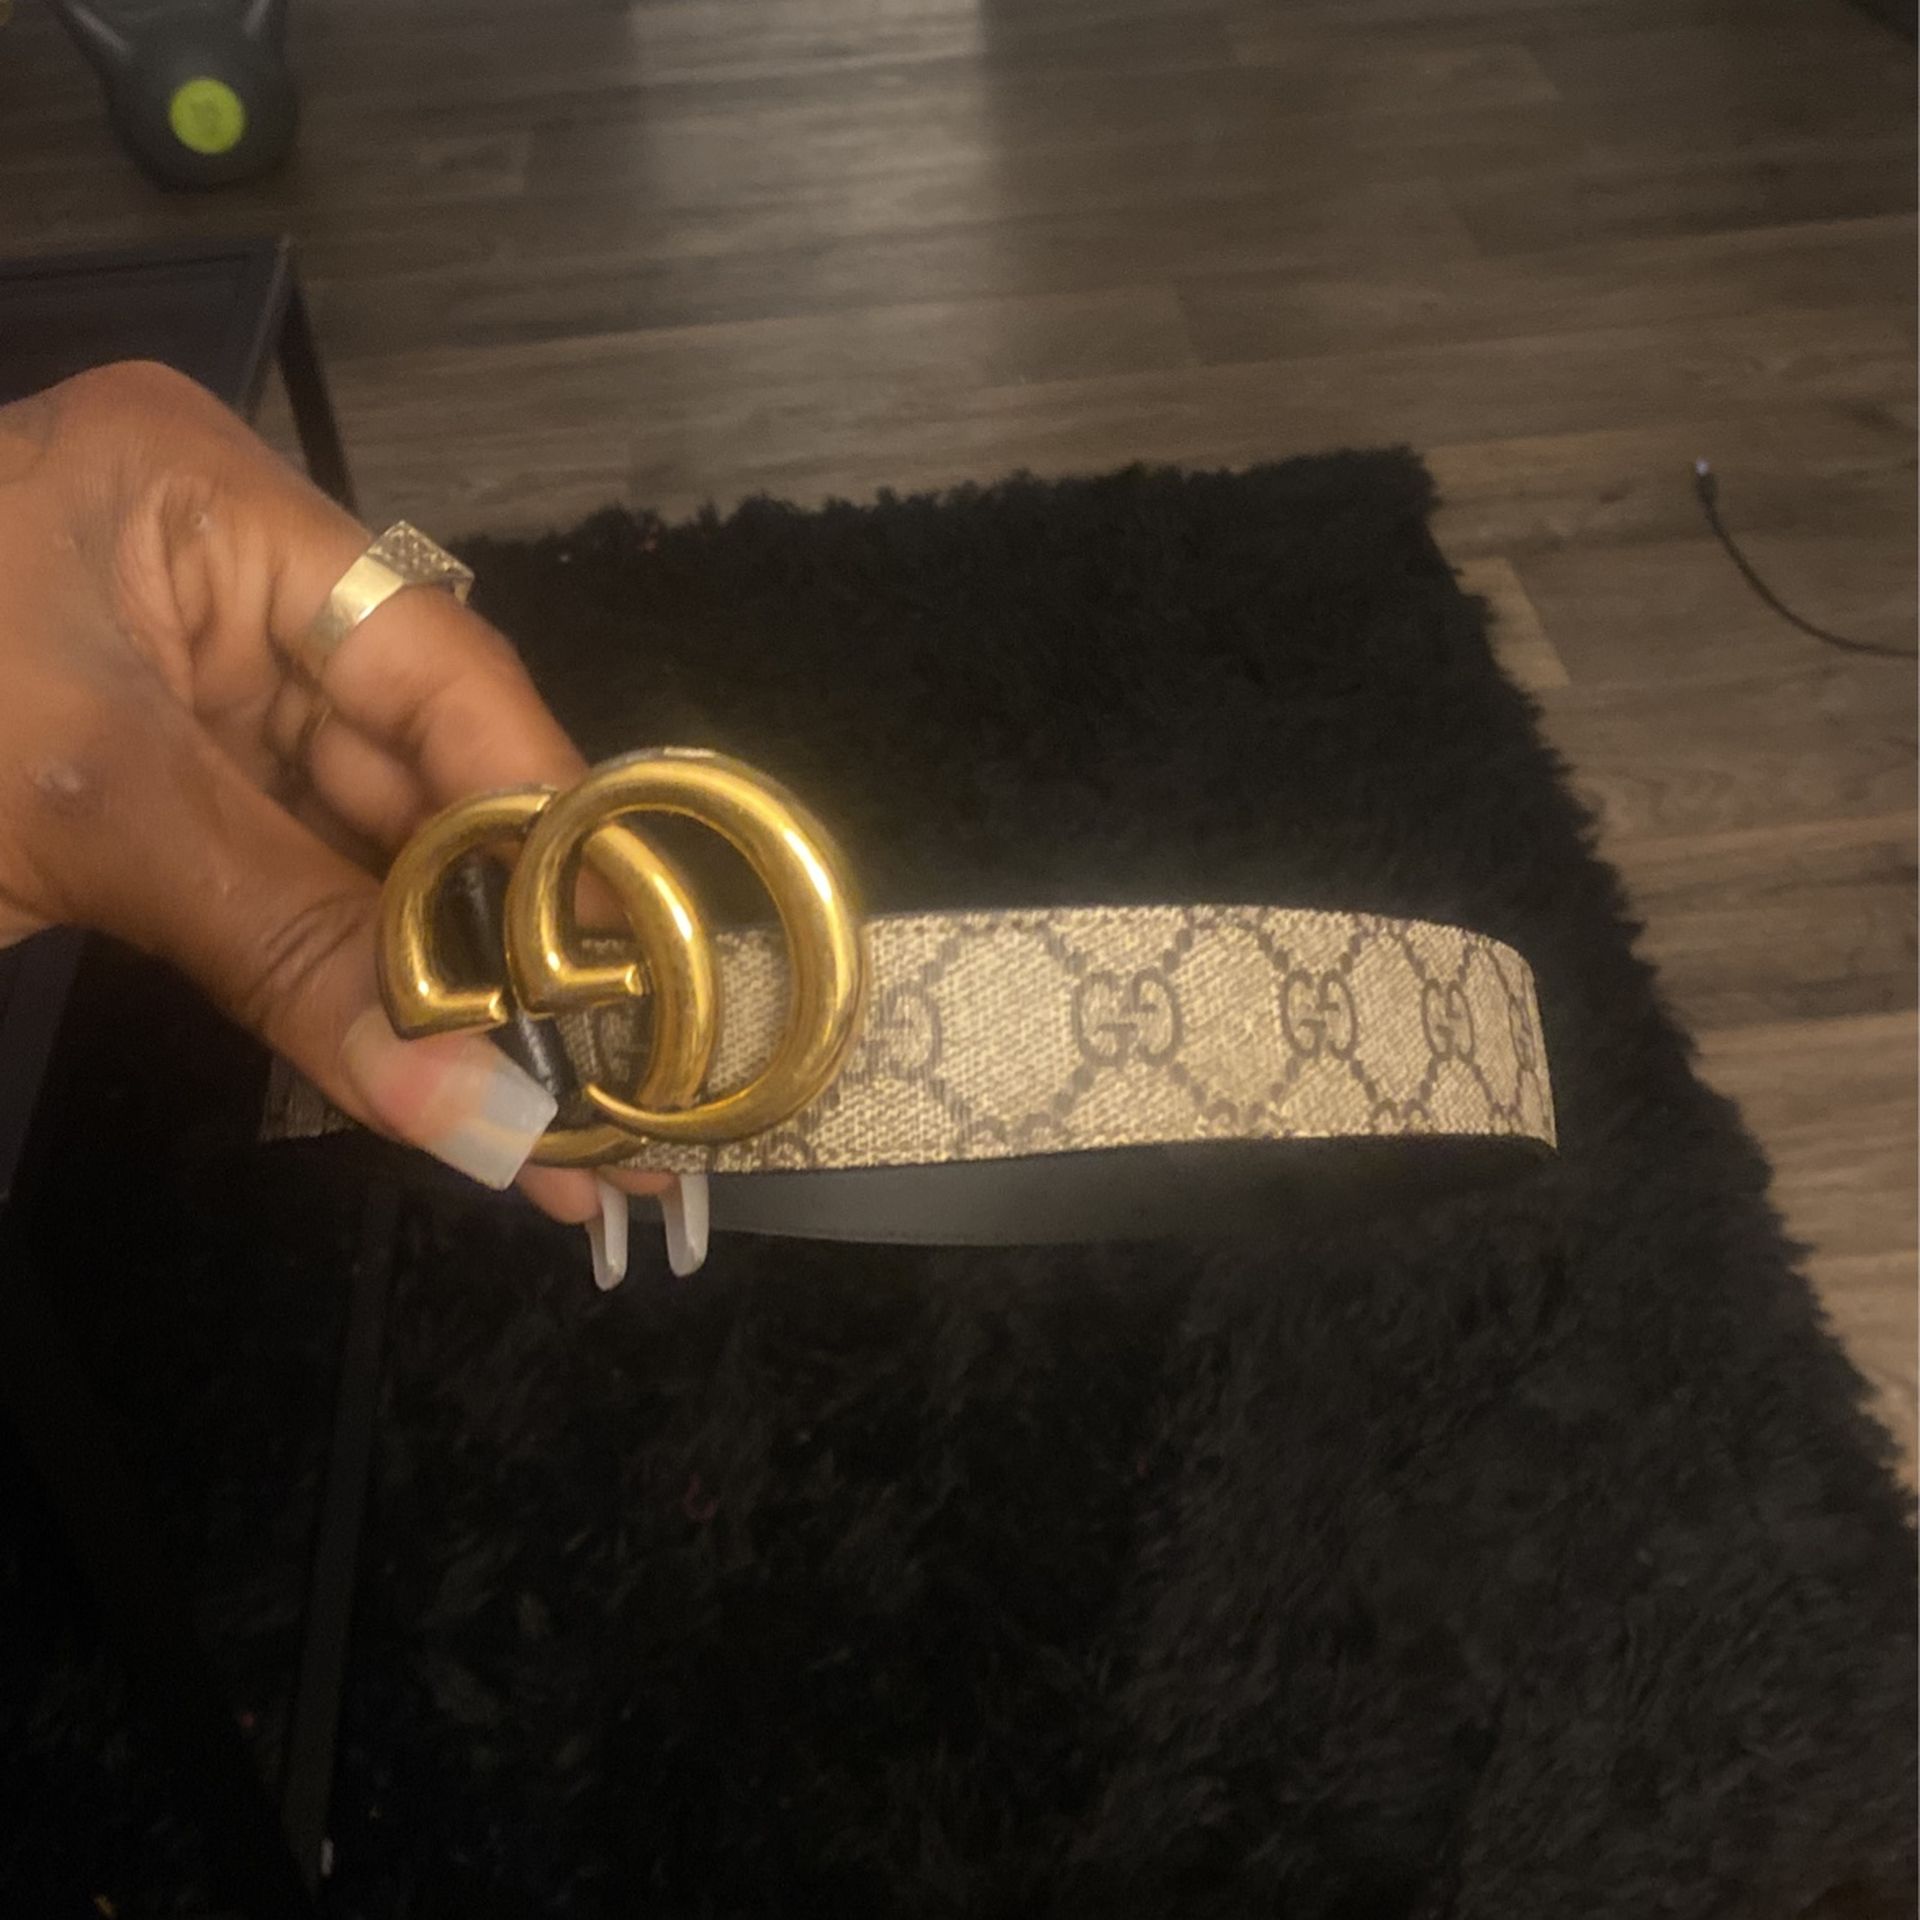 Hundred percent authentic Gucci belt 120 Final price